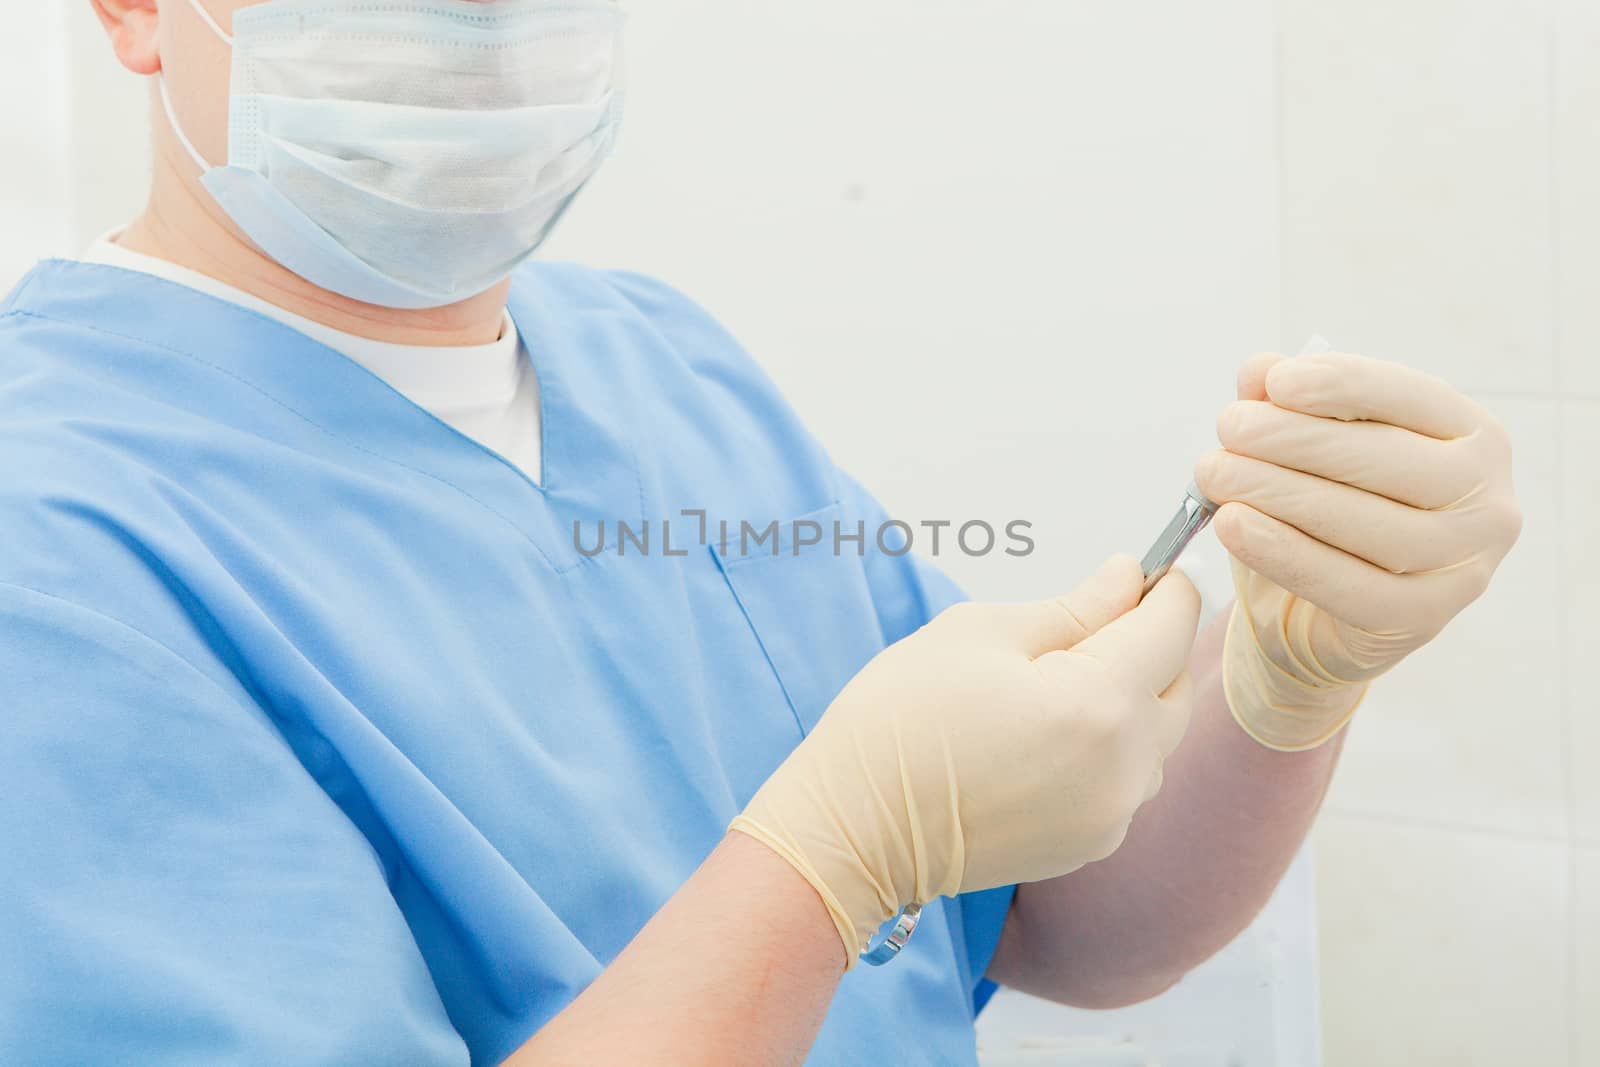 A medical worker holds a syringe in his gloves against a light background. close-up